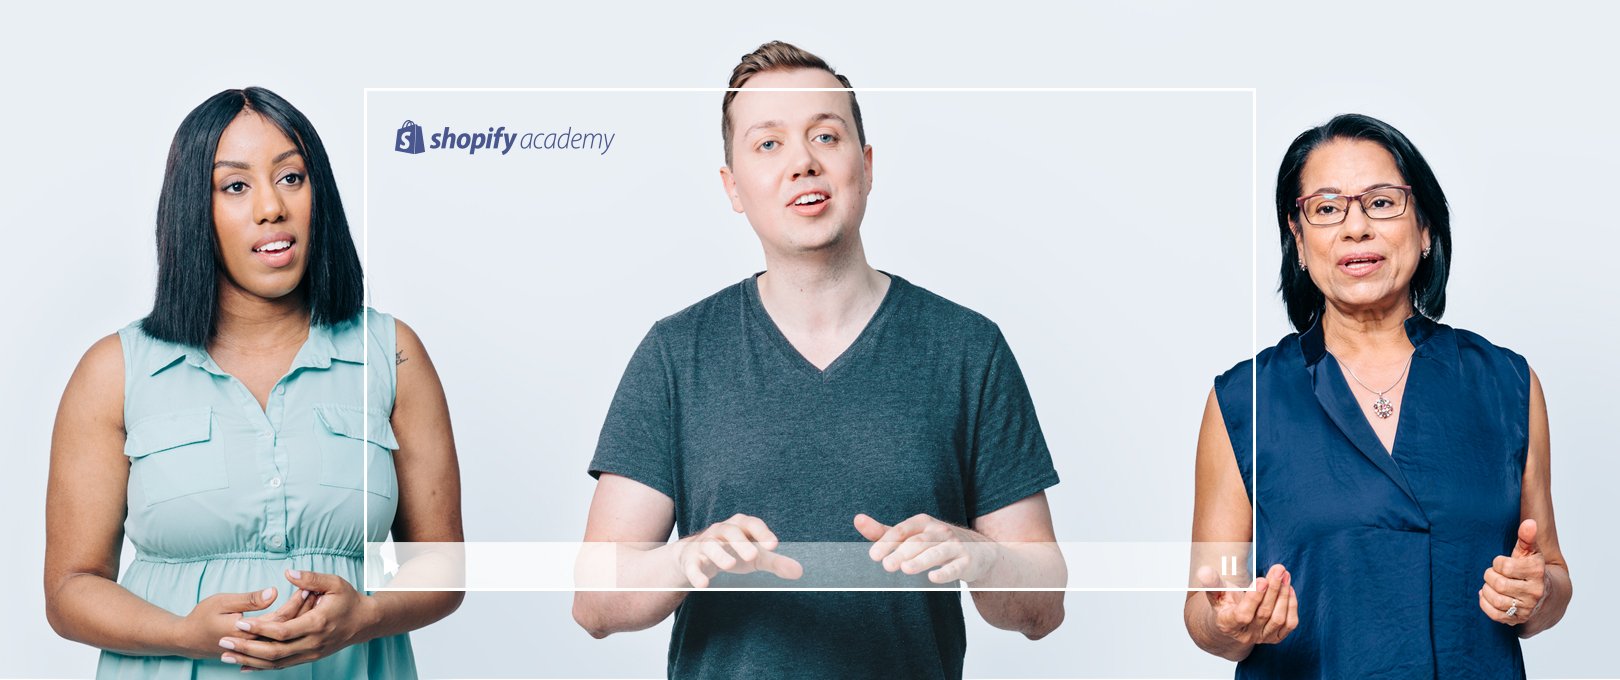 Fast Track Your eCommerce Growth With Shopify Academy